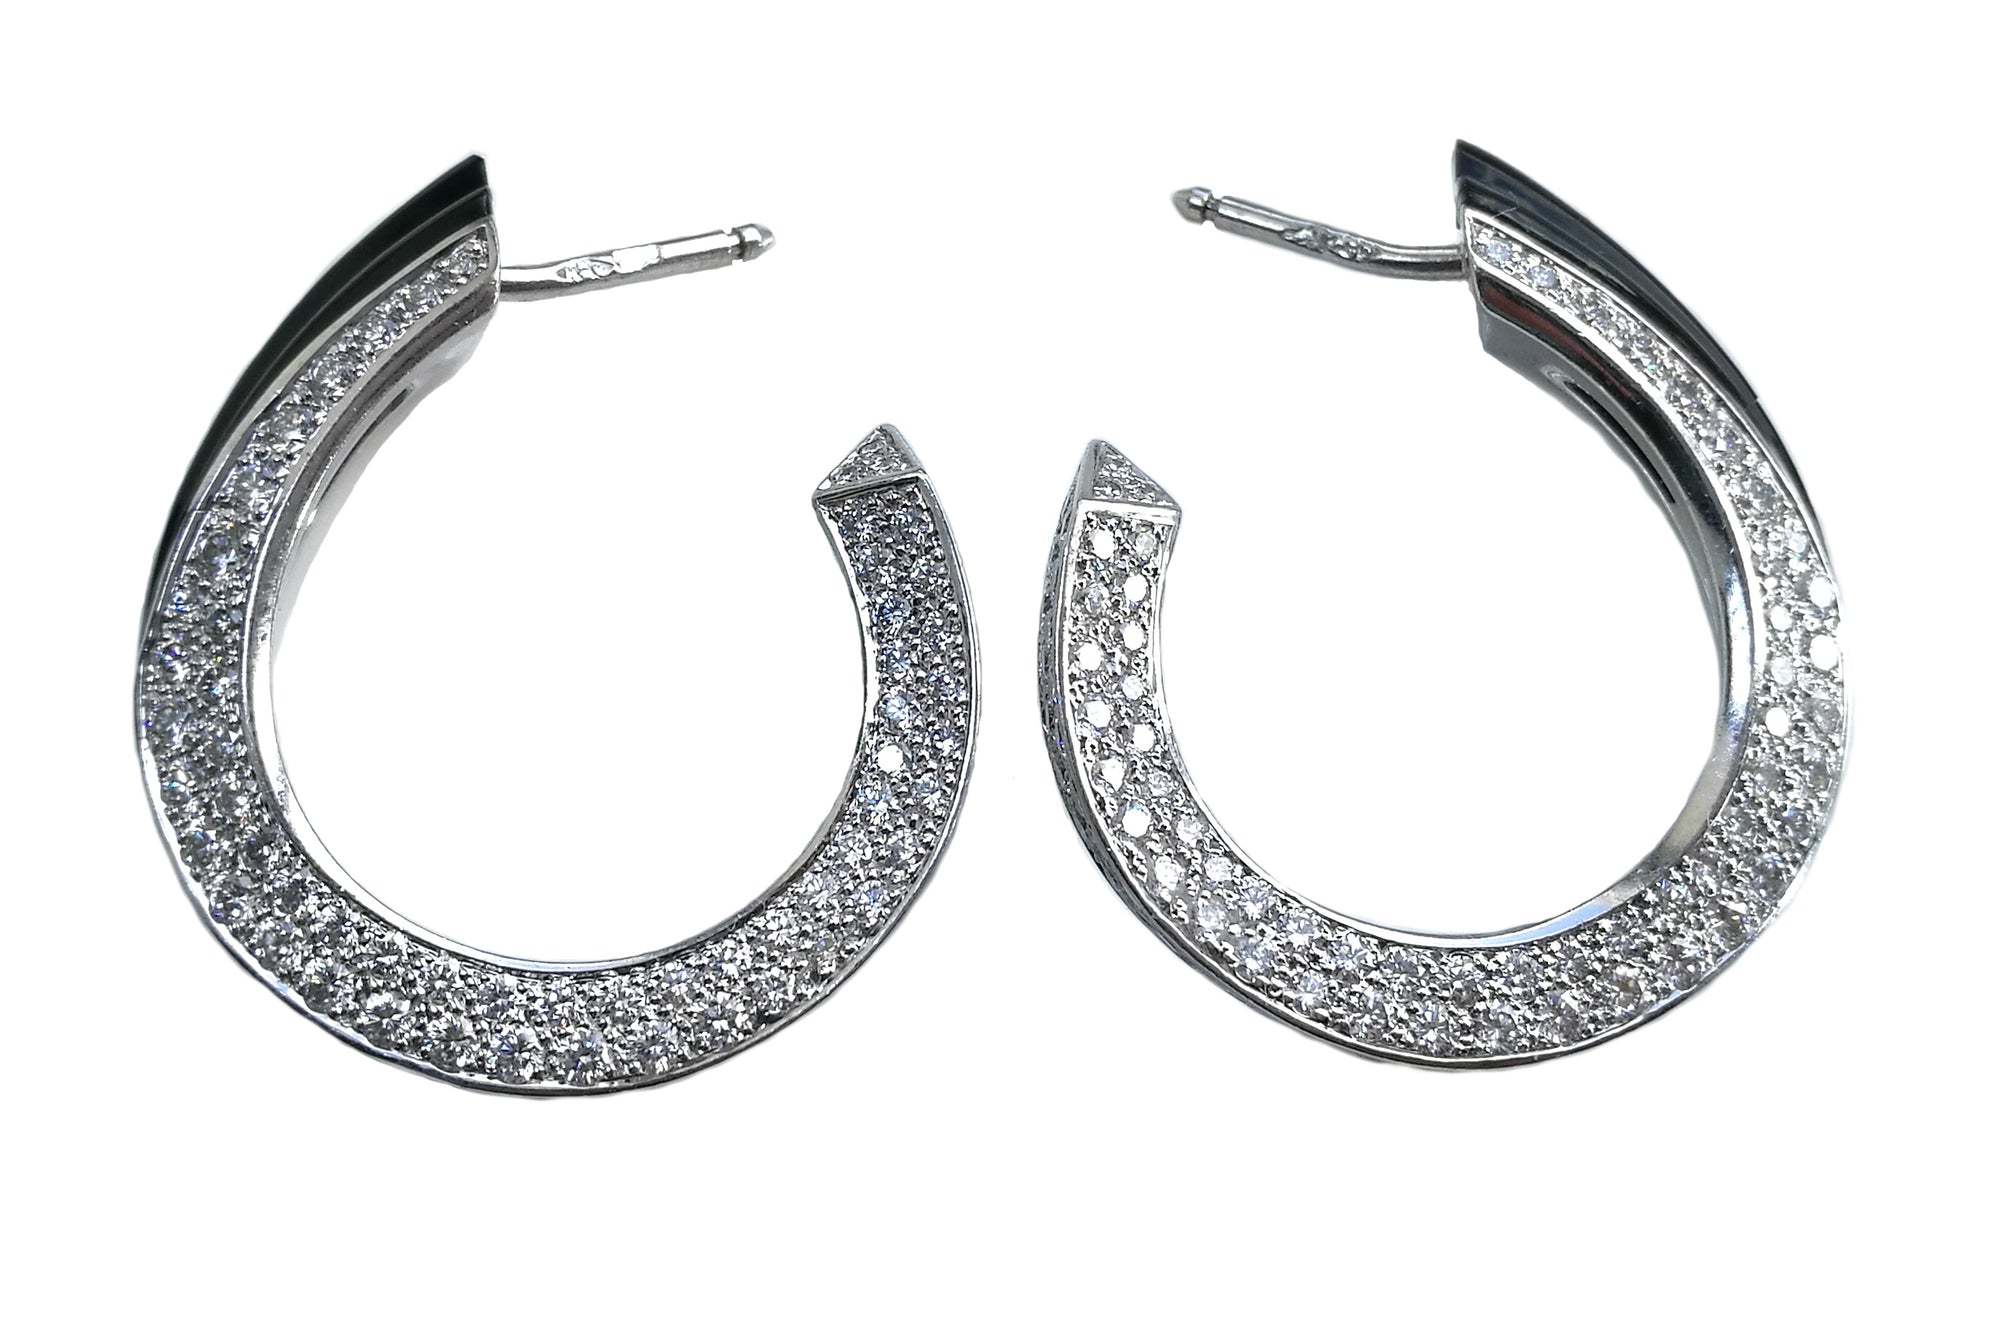 Cartier Panthere 5.0ct Diamond Hoop Earrings in 18k White Gold & Onyx